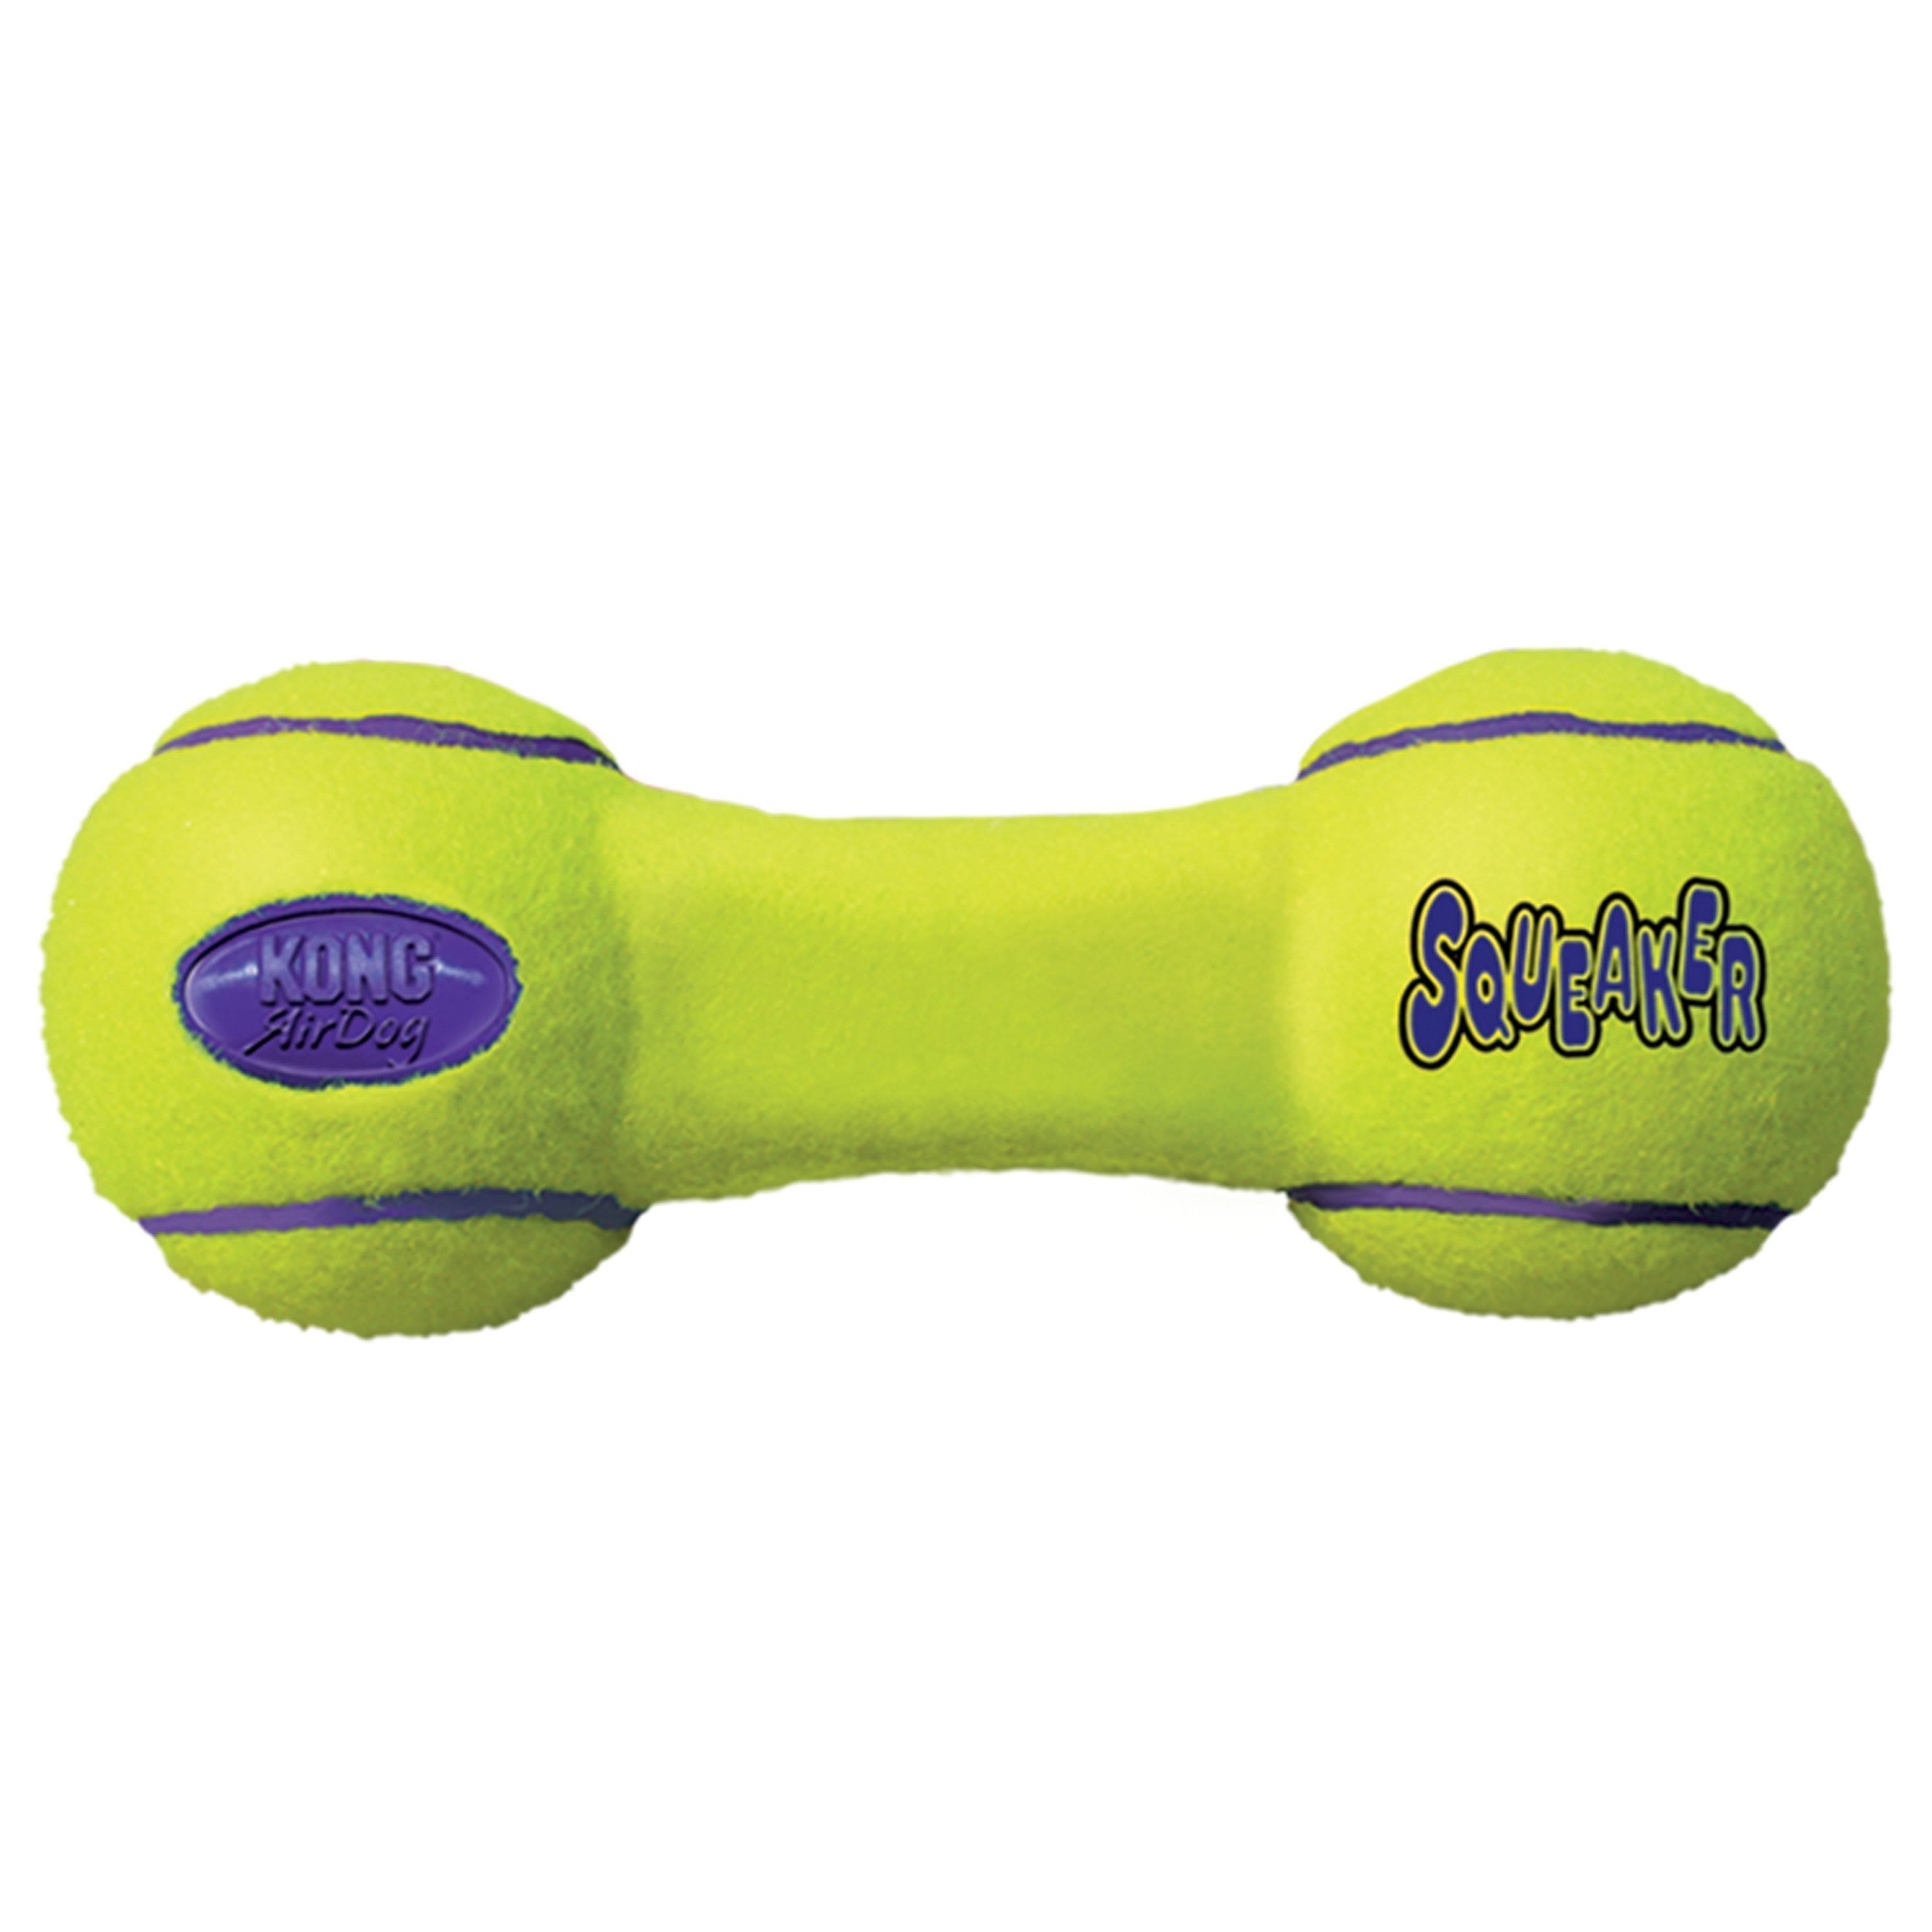 Kong Air Squeaker Dumbbell Dog Toy - Large